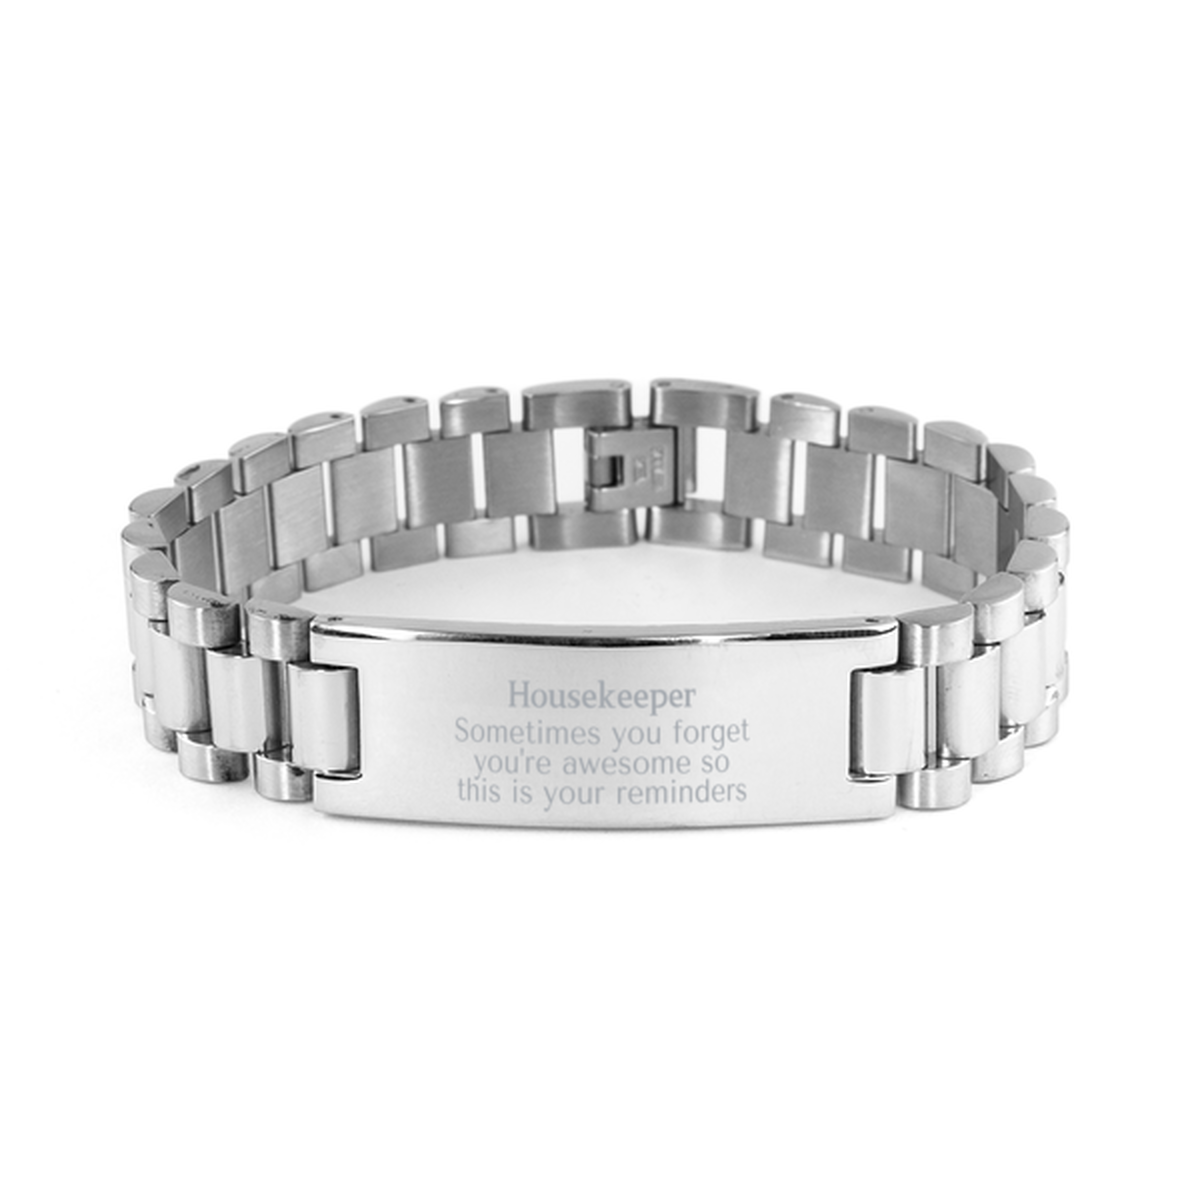 Sentimental Housekeeper Ladder Stainless Steel Bracelet, Housekeeper Sometimes you forget you're awesome so this is your reminders, Graduation Christmas Birthday Gifts for Housekeeper, Men, Women, Coworkers